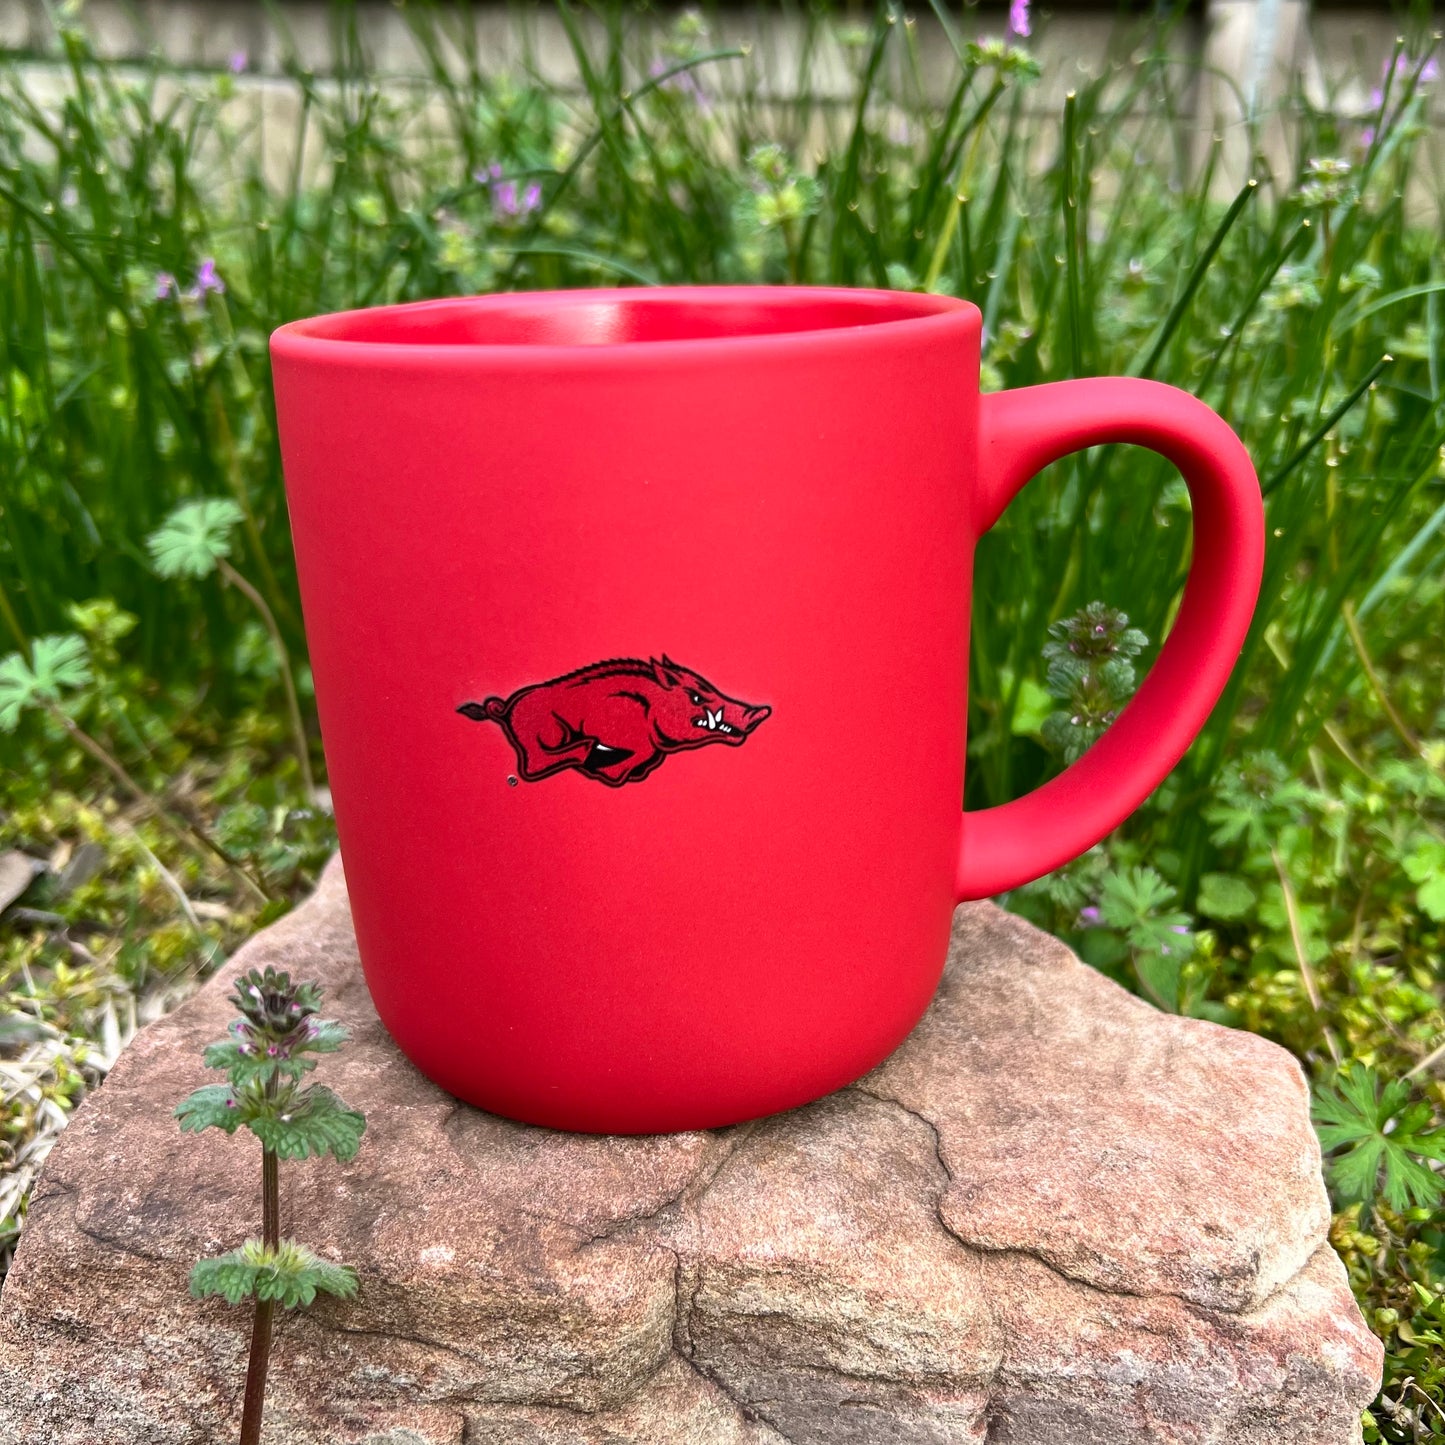 red mug with razorback logo set on a rock with greenery in the background.